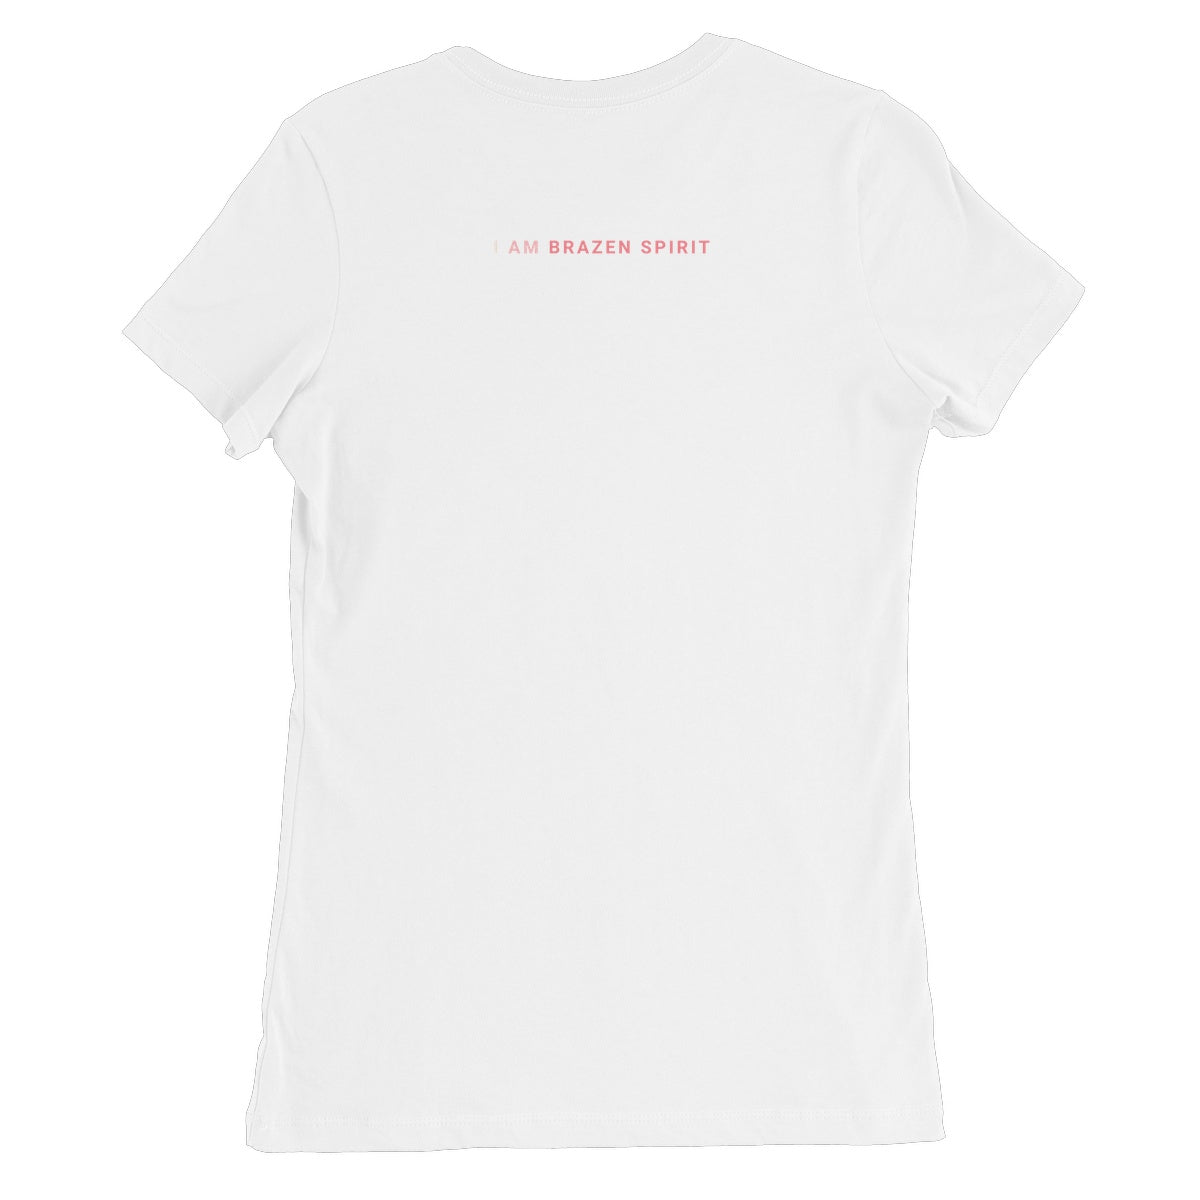 Being Kind to Myself - White - Women's T-Shirt